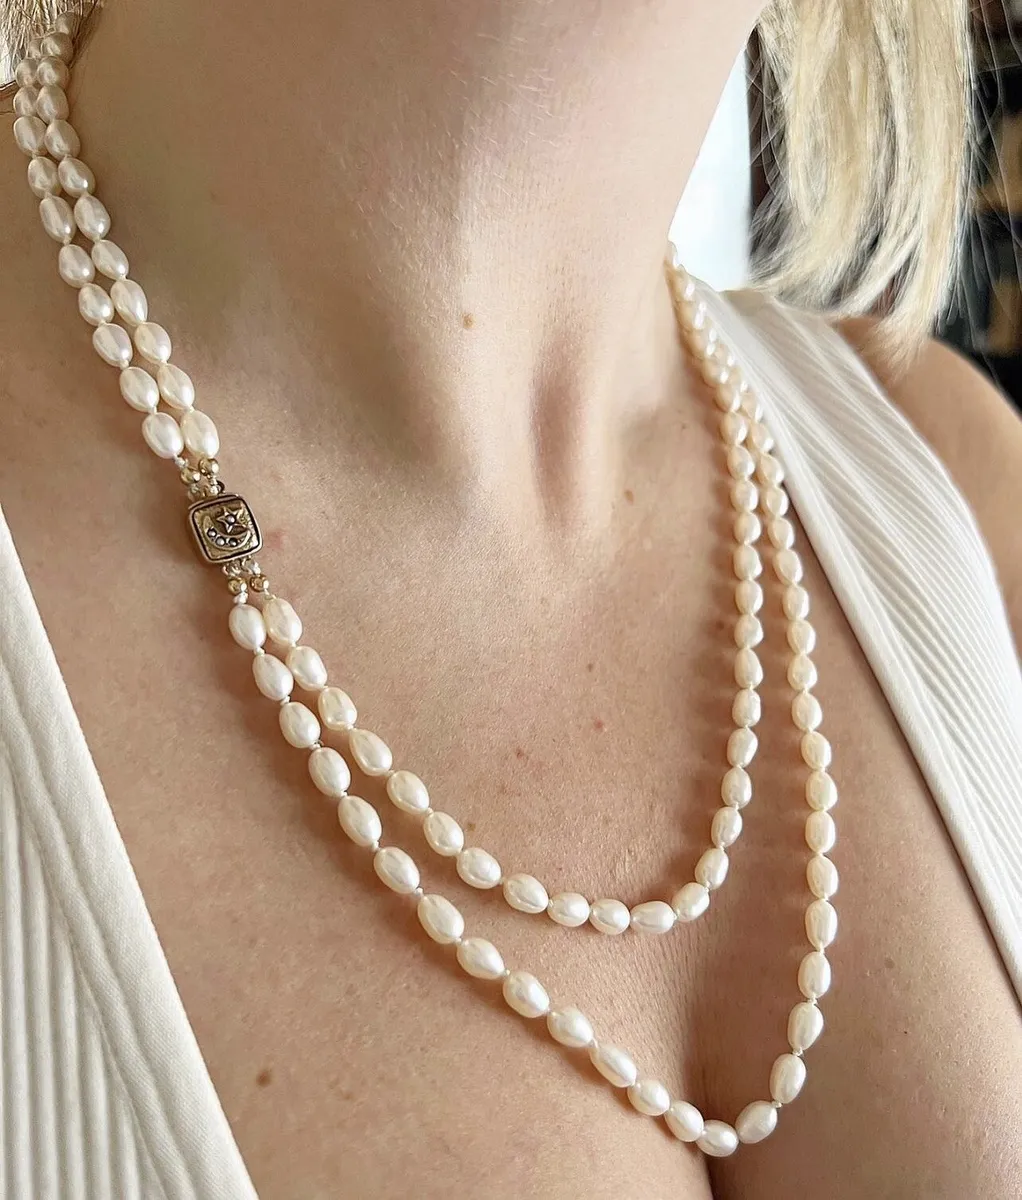 ANTIQUE • Victorian Double Strand Pearl Necklace w/ 14k Star & Crescent  Clasp